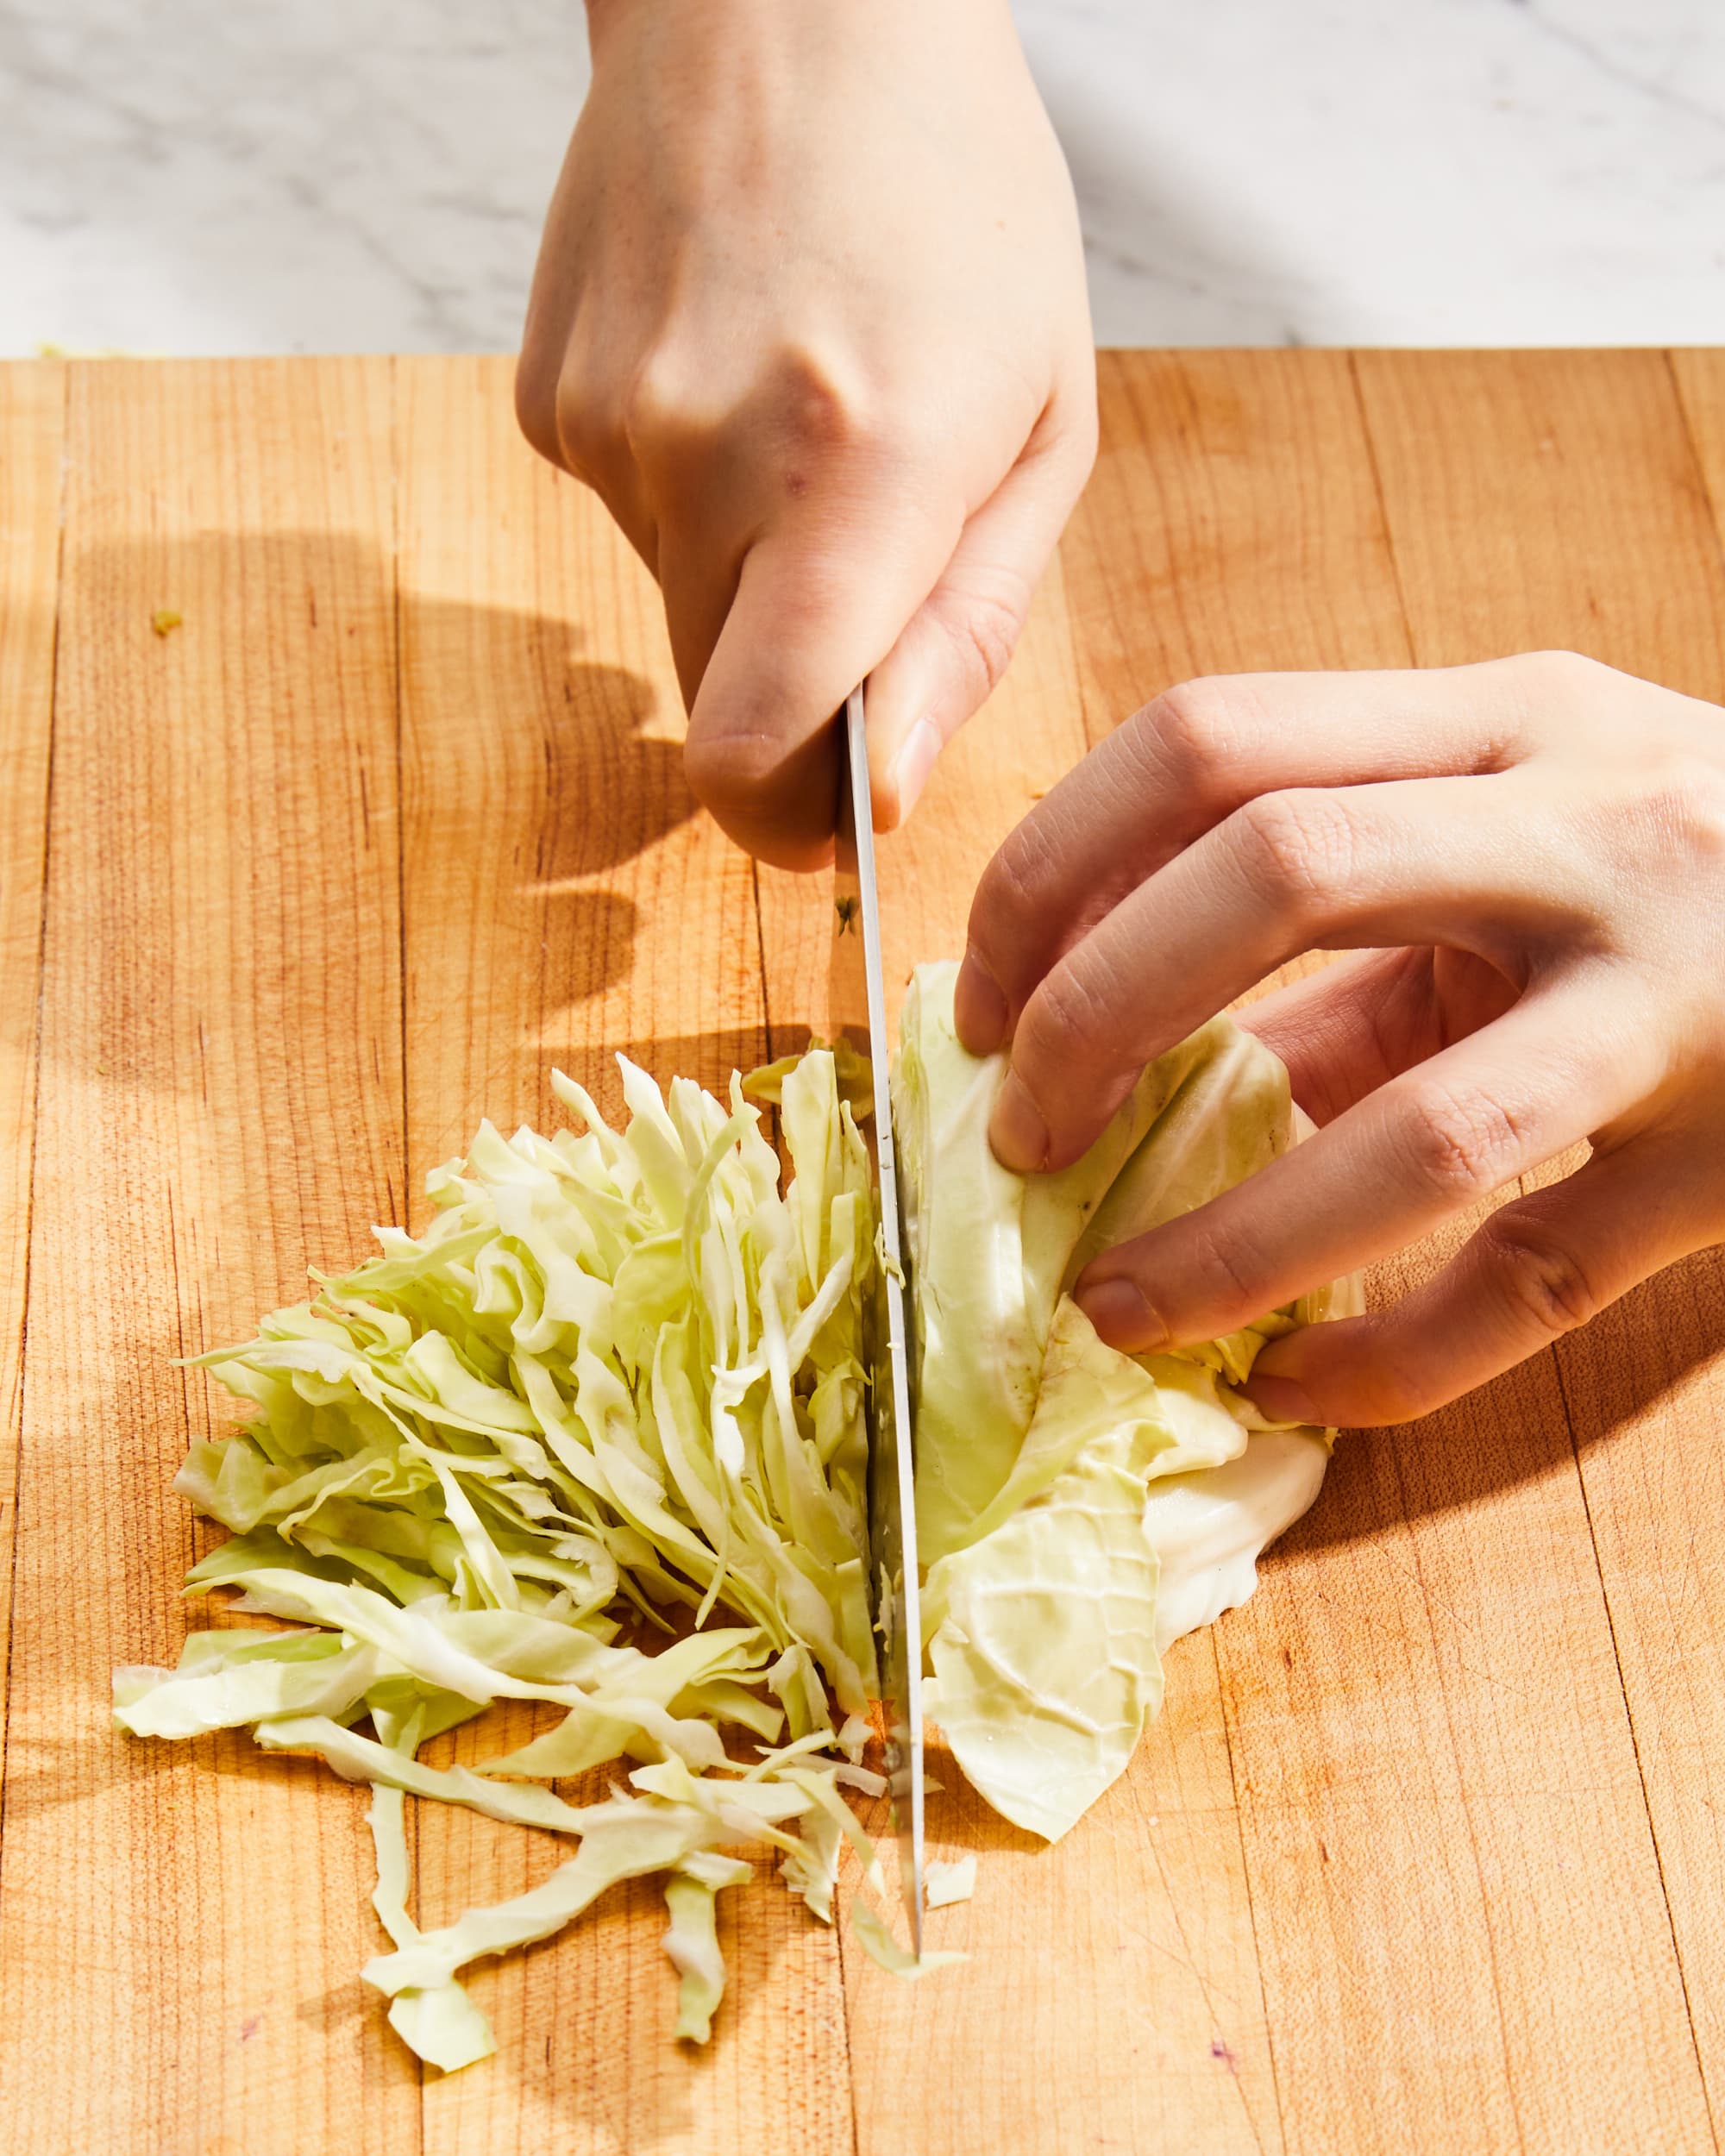 Tips and Tricks for Those Hard to Cut Veggies